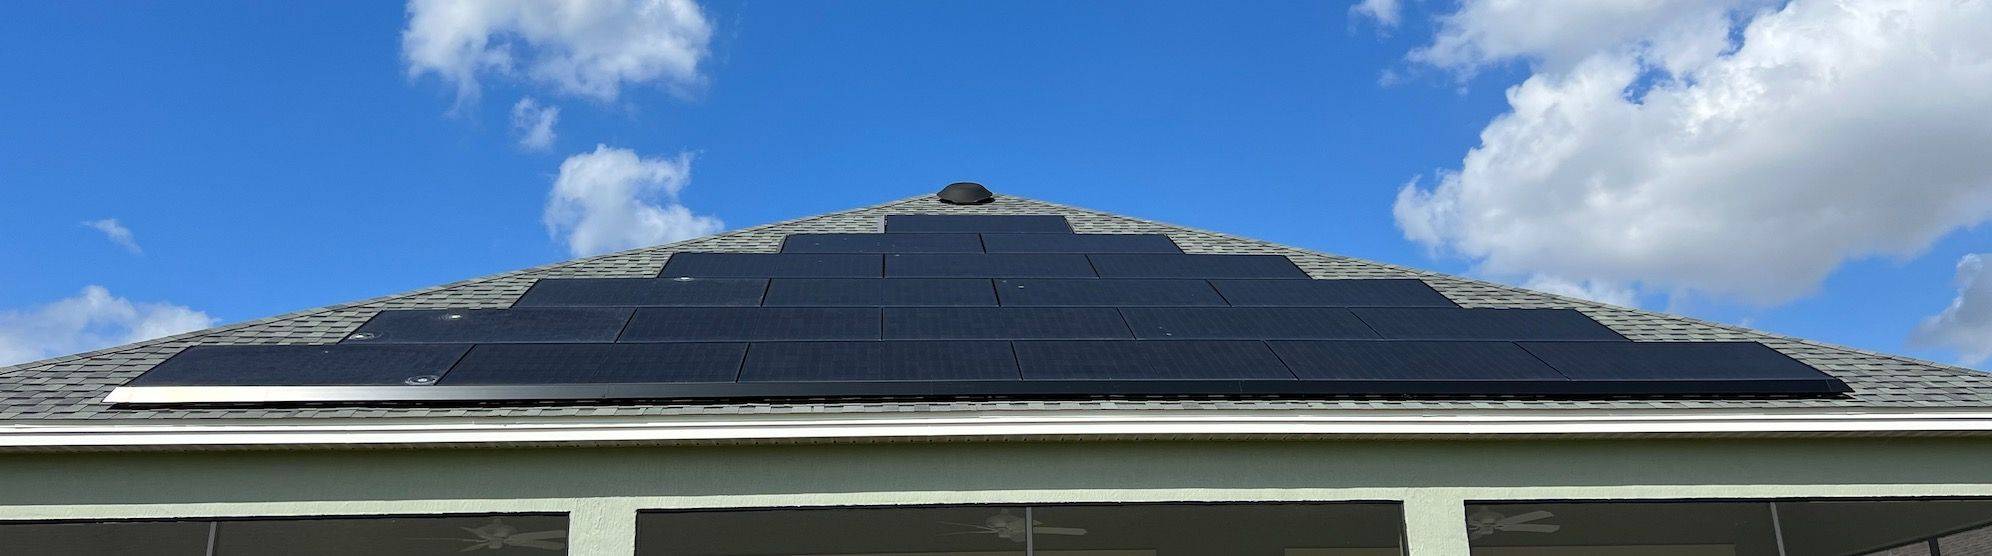 New solar installation takes multiple golf ball hits